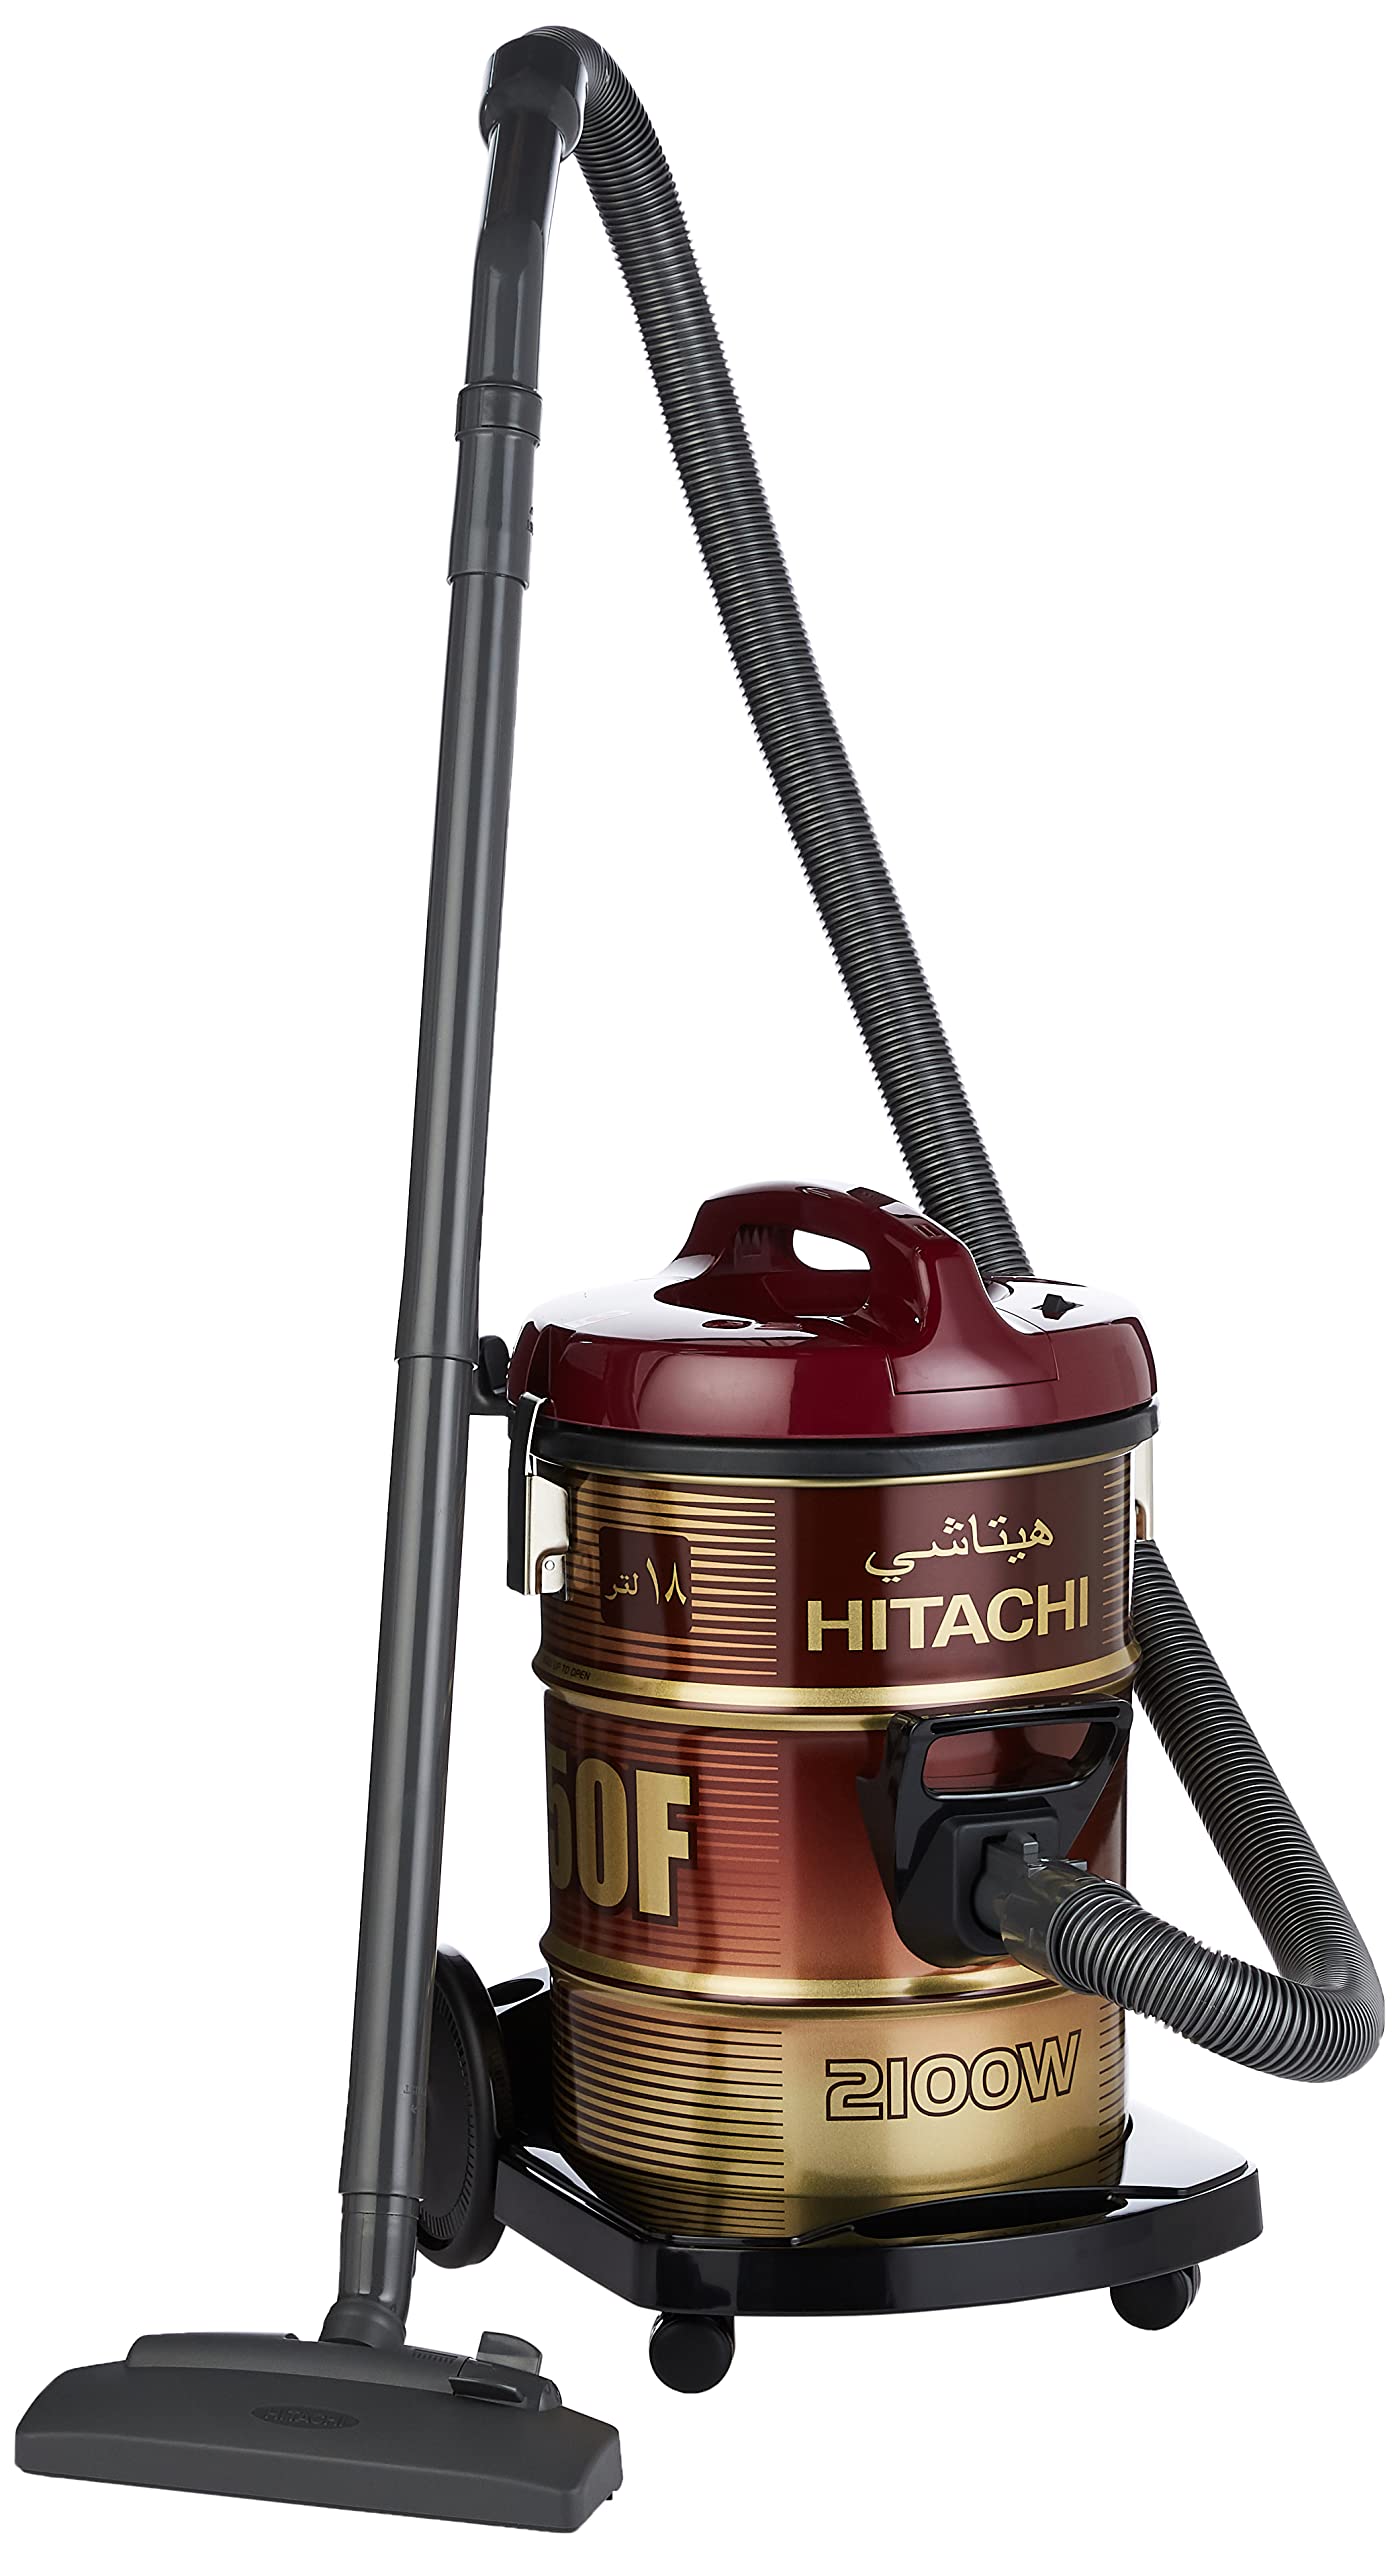 Hitachi Drum Vacuum Cleaner 2100 Watts, 18 Liters Tank Dust Capacity With 7.8M Extra Long Power Code, Removable & Washable Filter